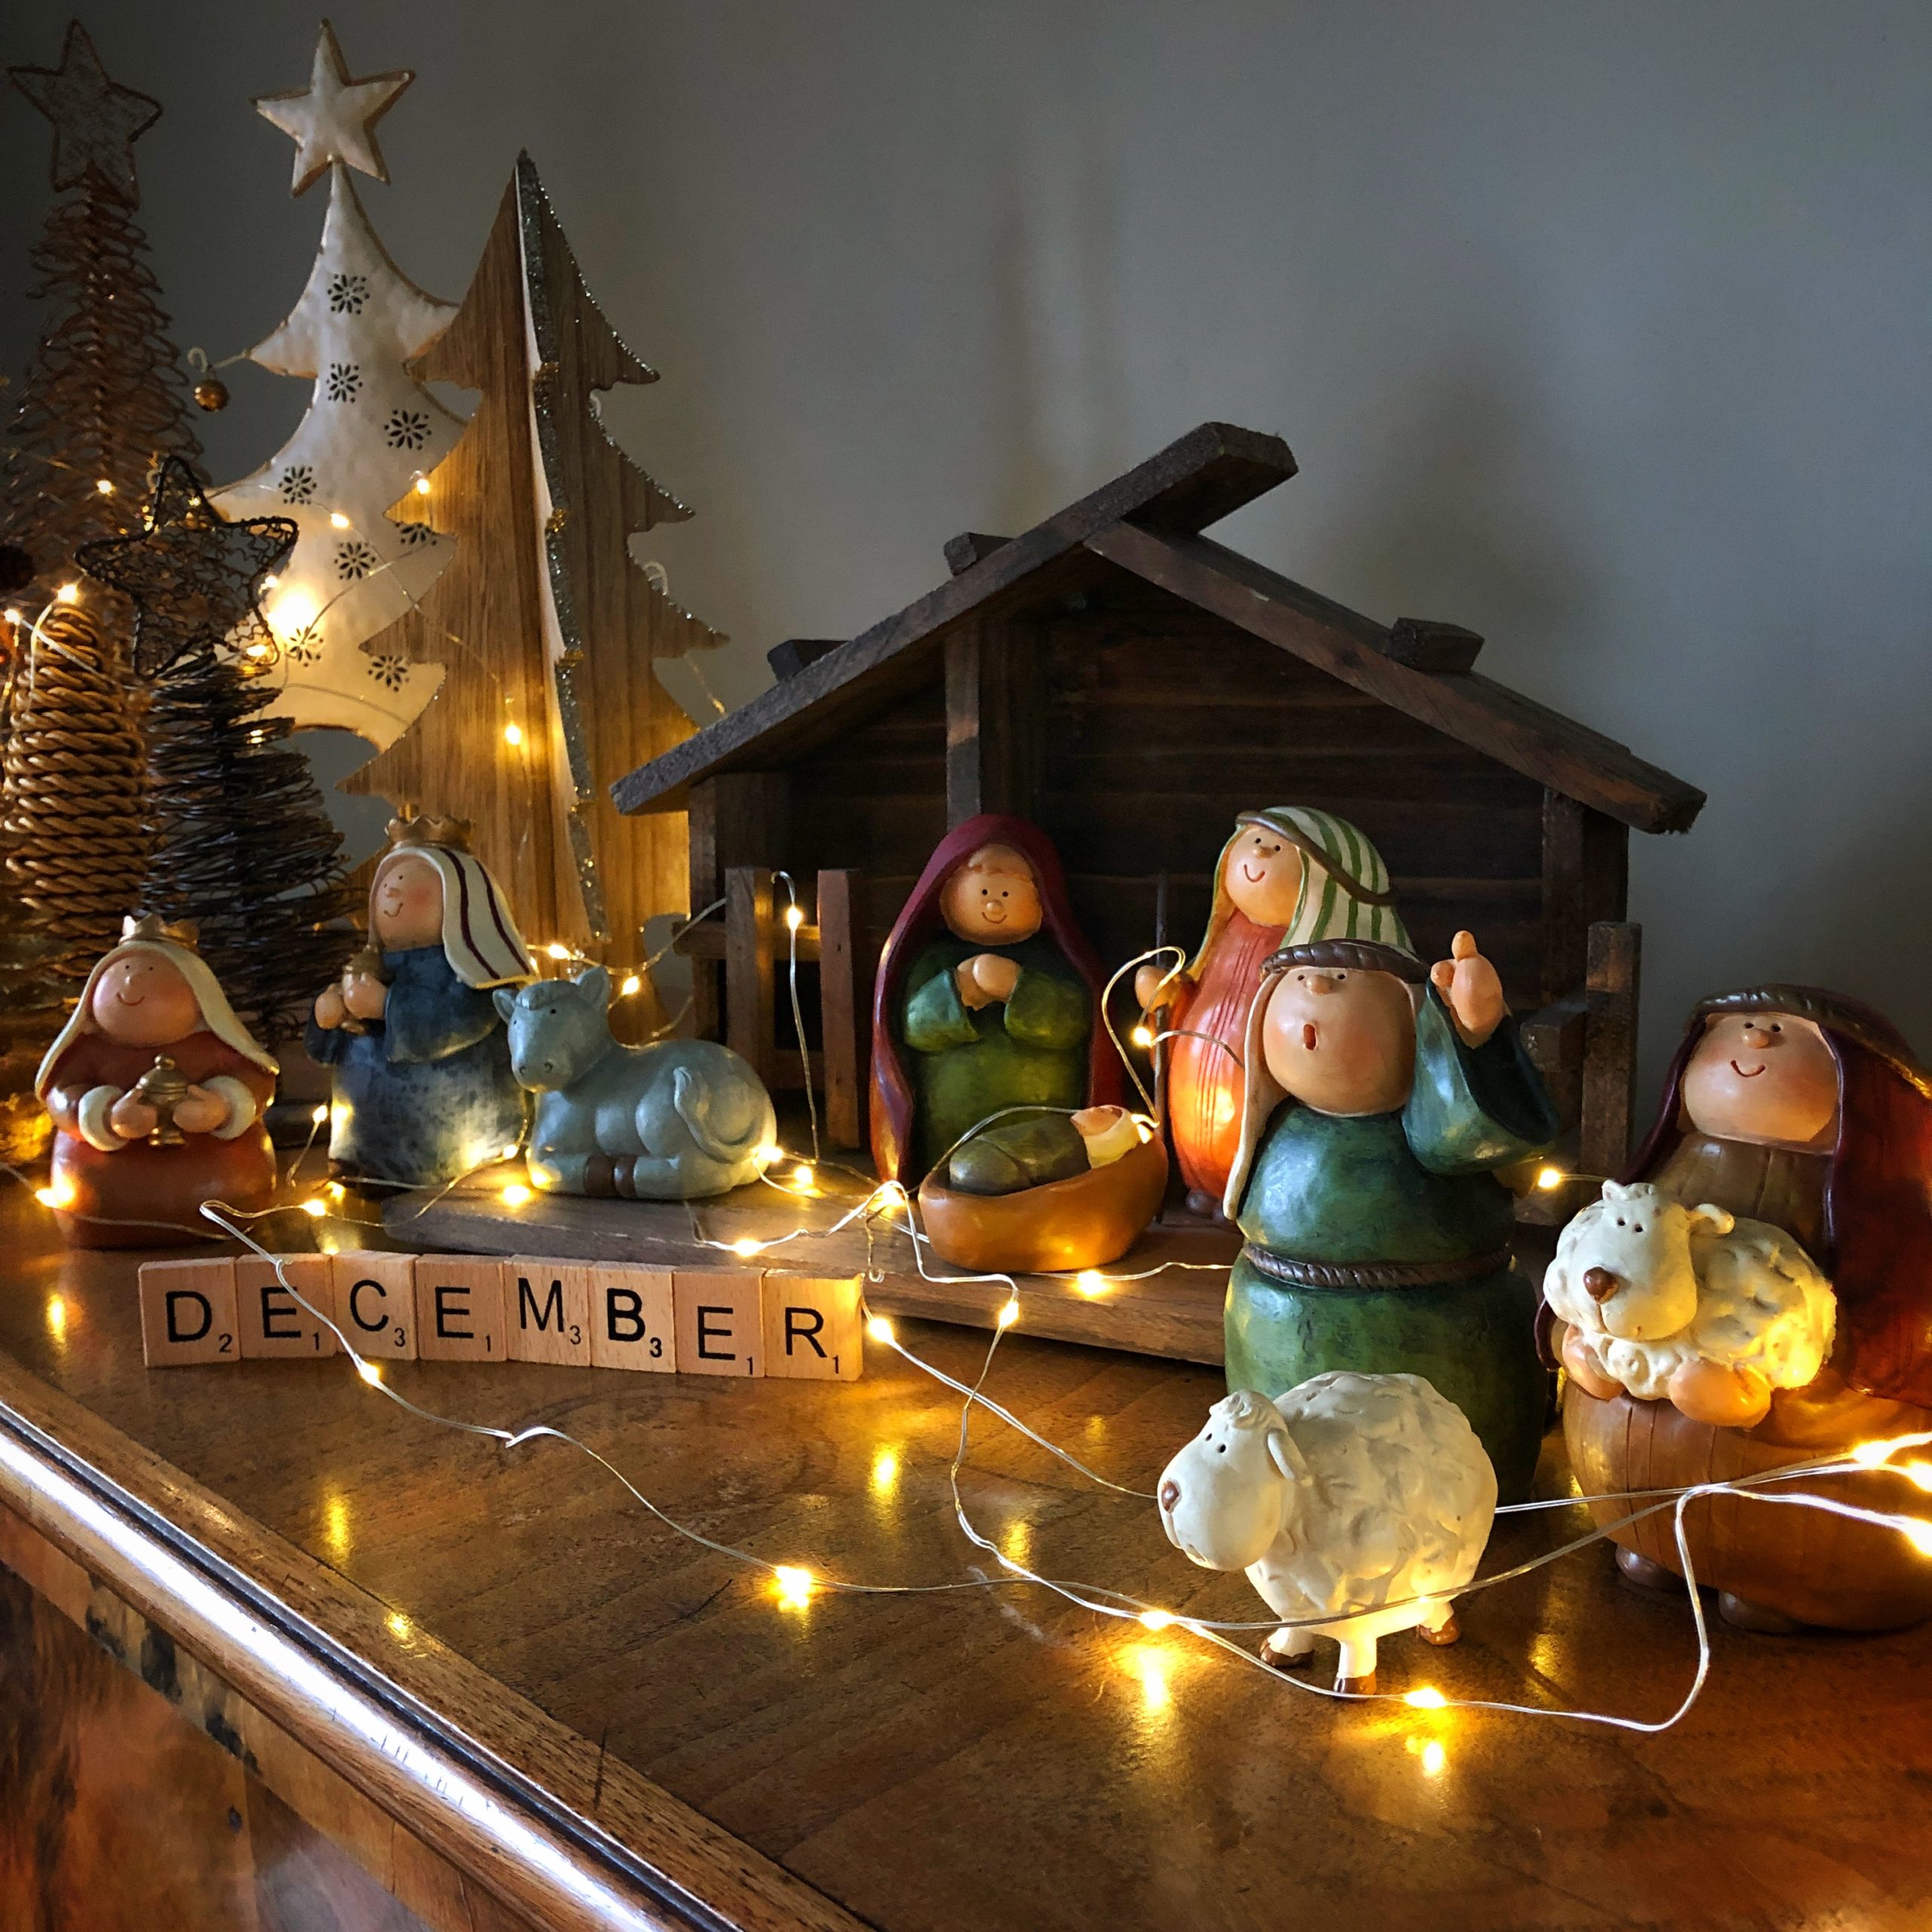 On the first day of December ….. a favourite Christmas Nativity